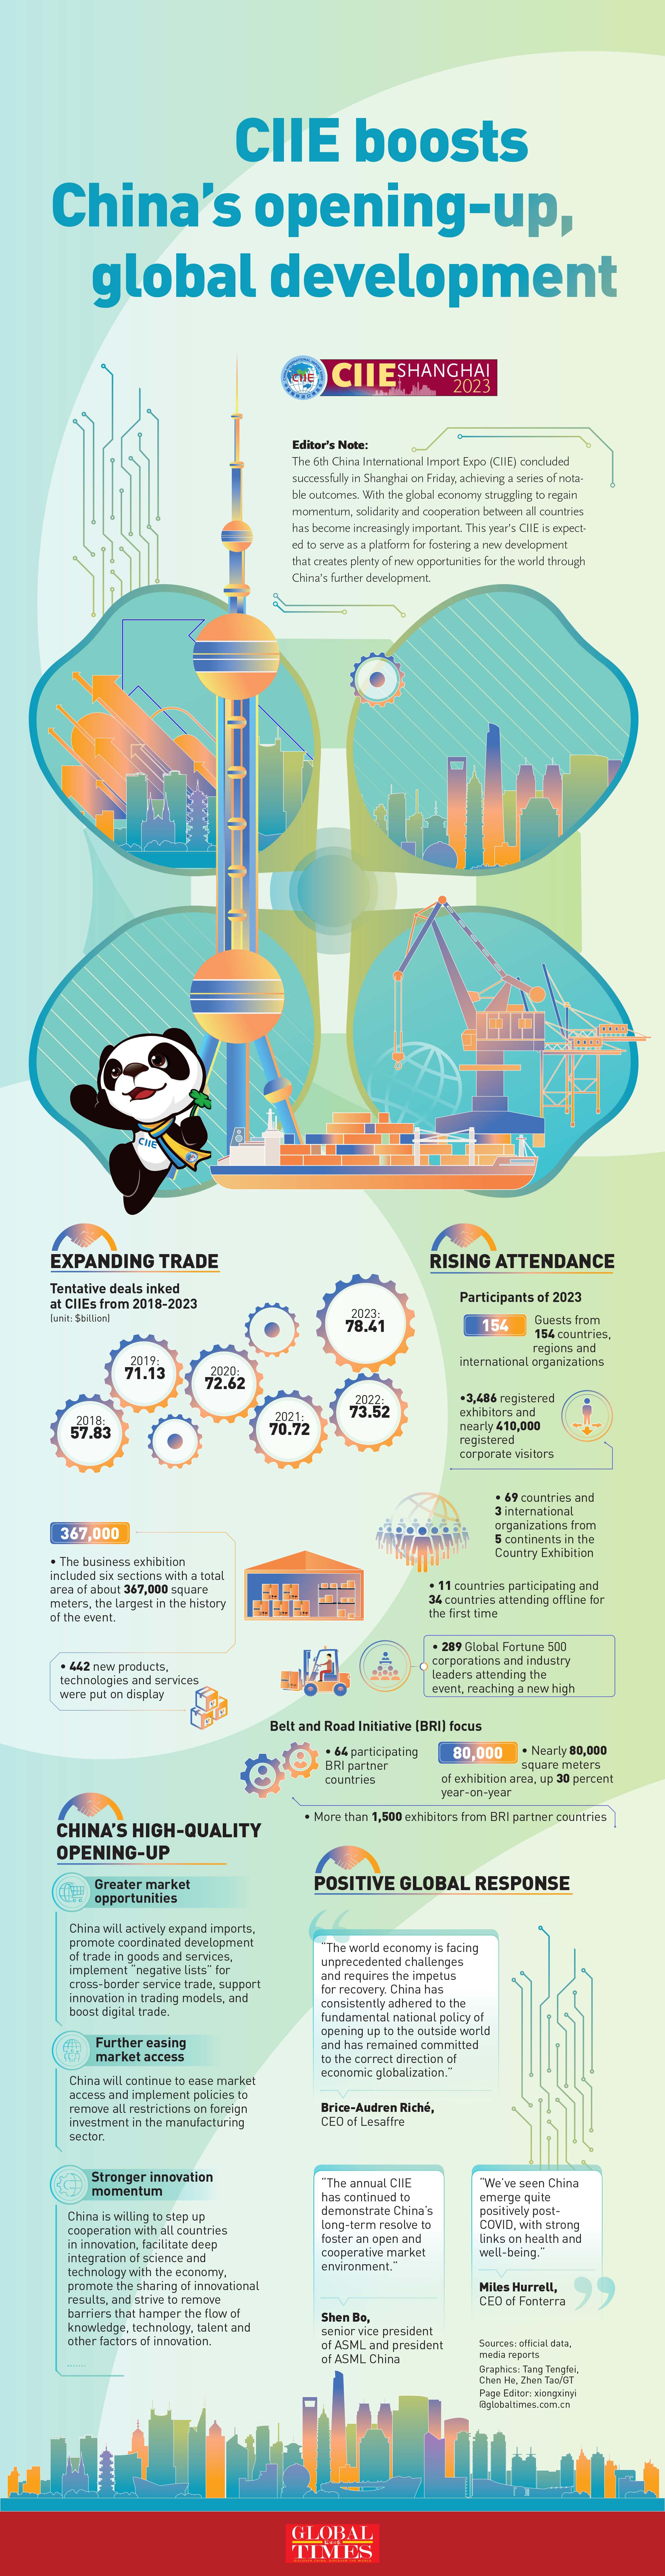 China's High-quality opening-up offers new opportunities Infographic:GT